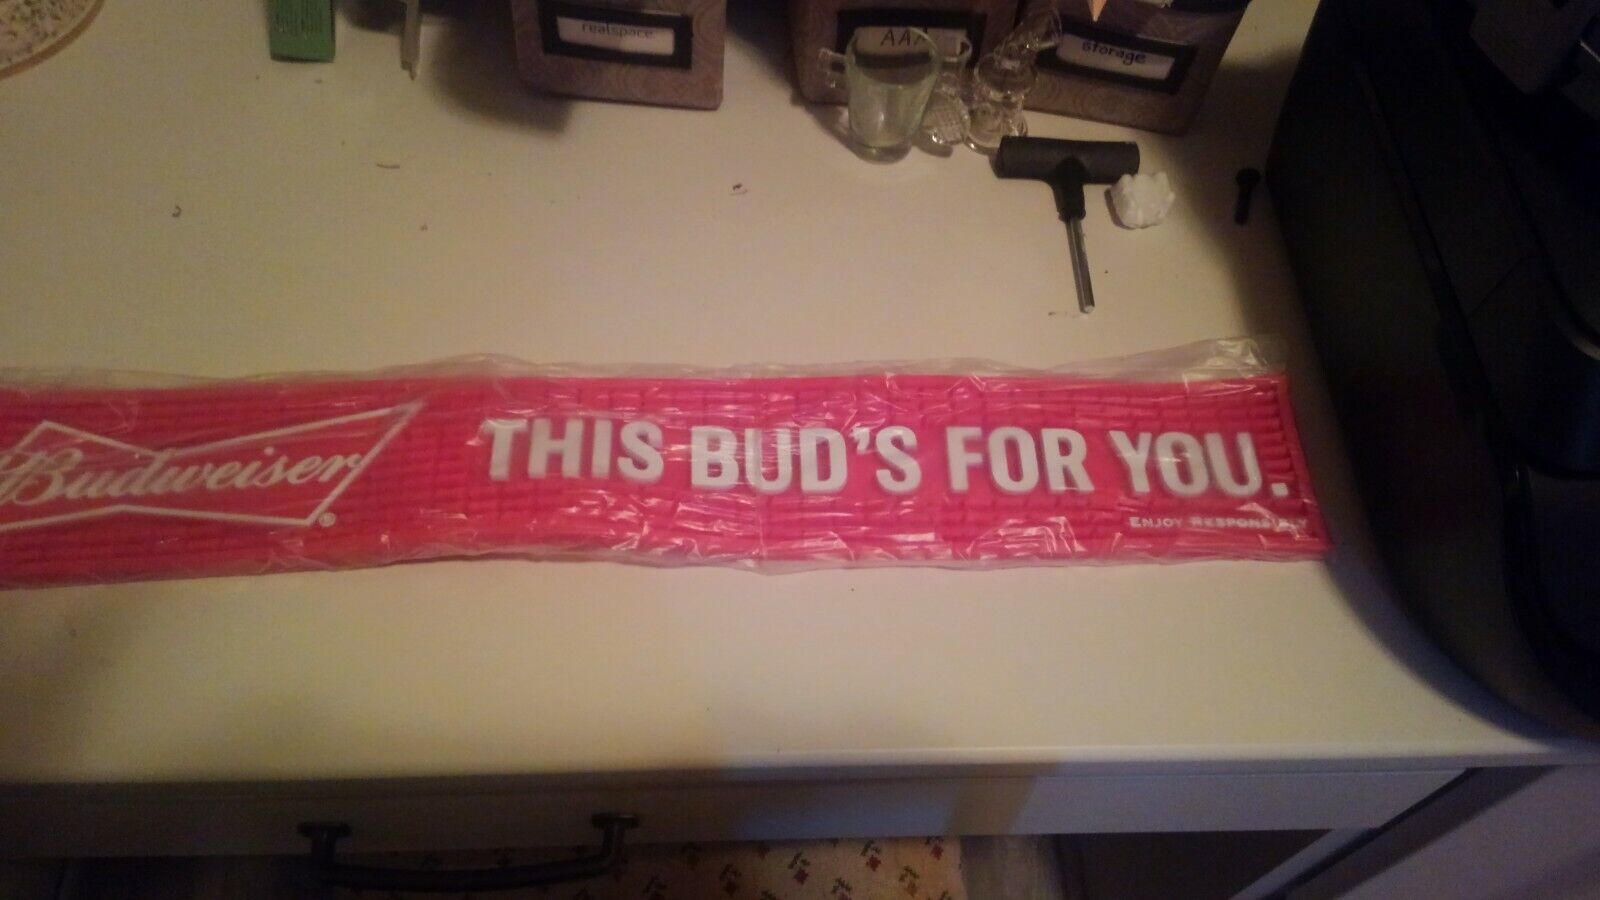 LARGE RUBBER BUDWEISER This BUD is DRYING RAIL SALE 94%OFF you BAR for BEER 品質のいい